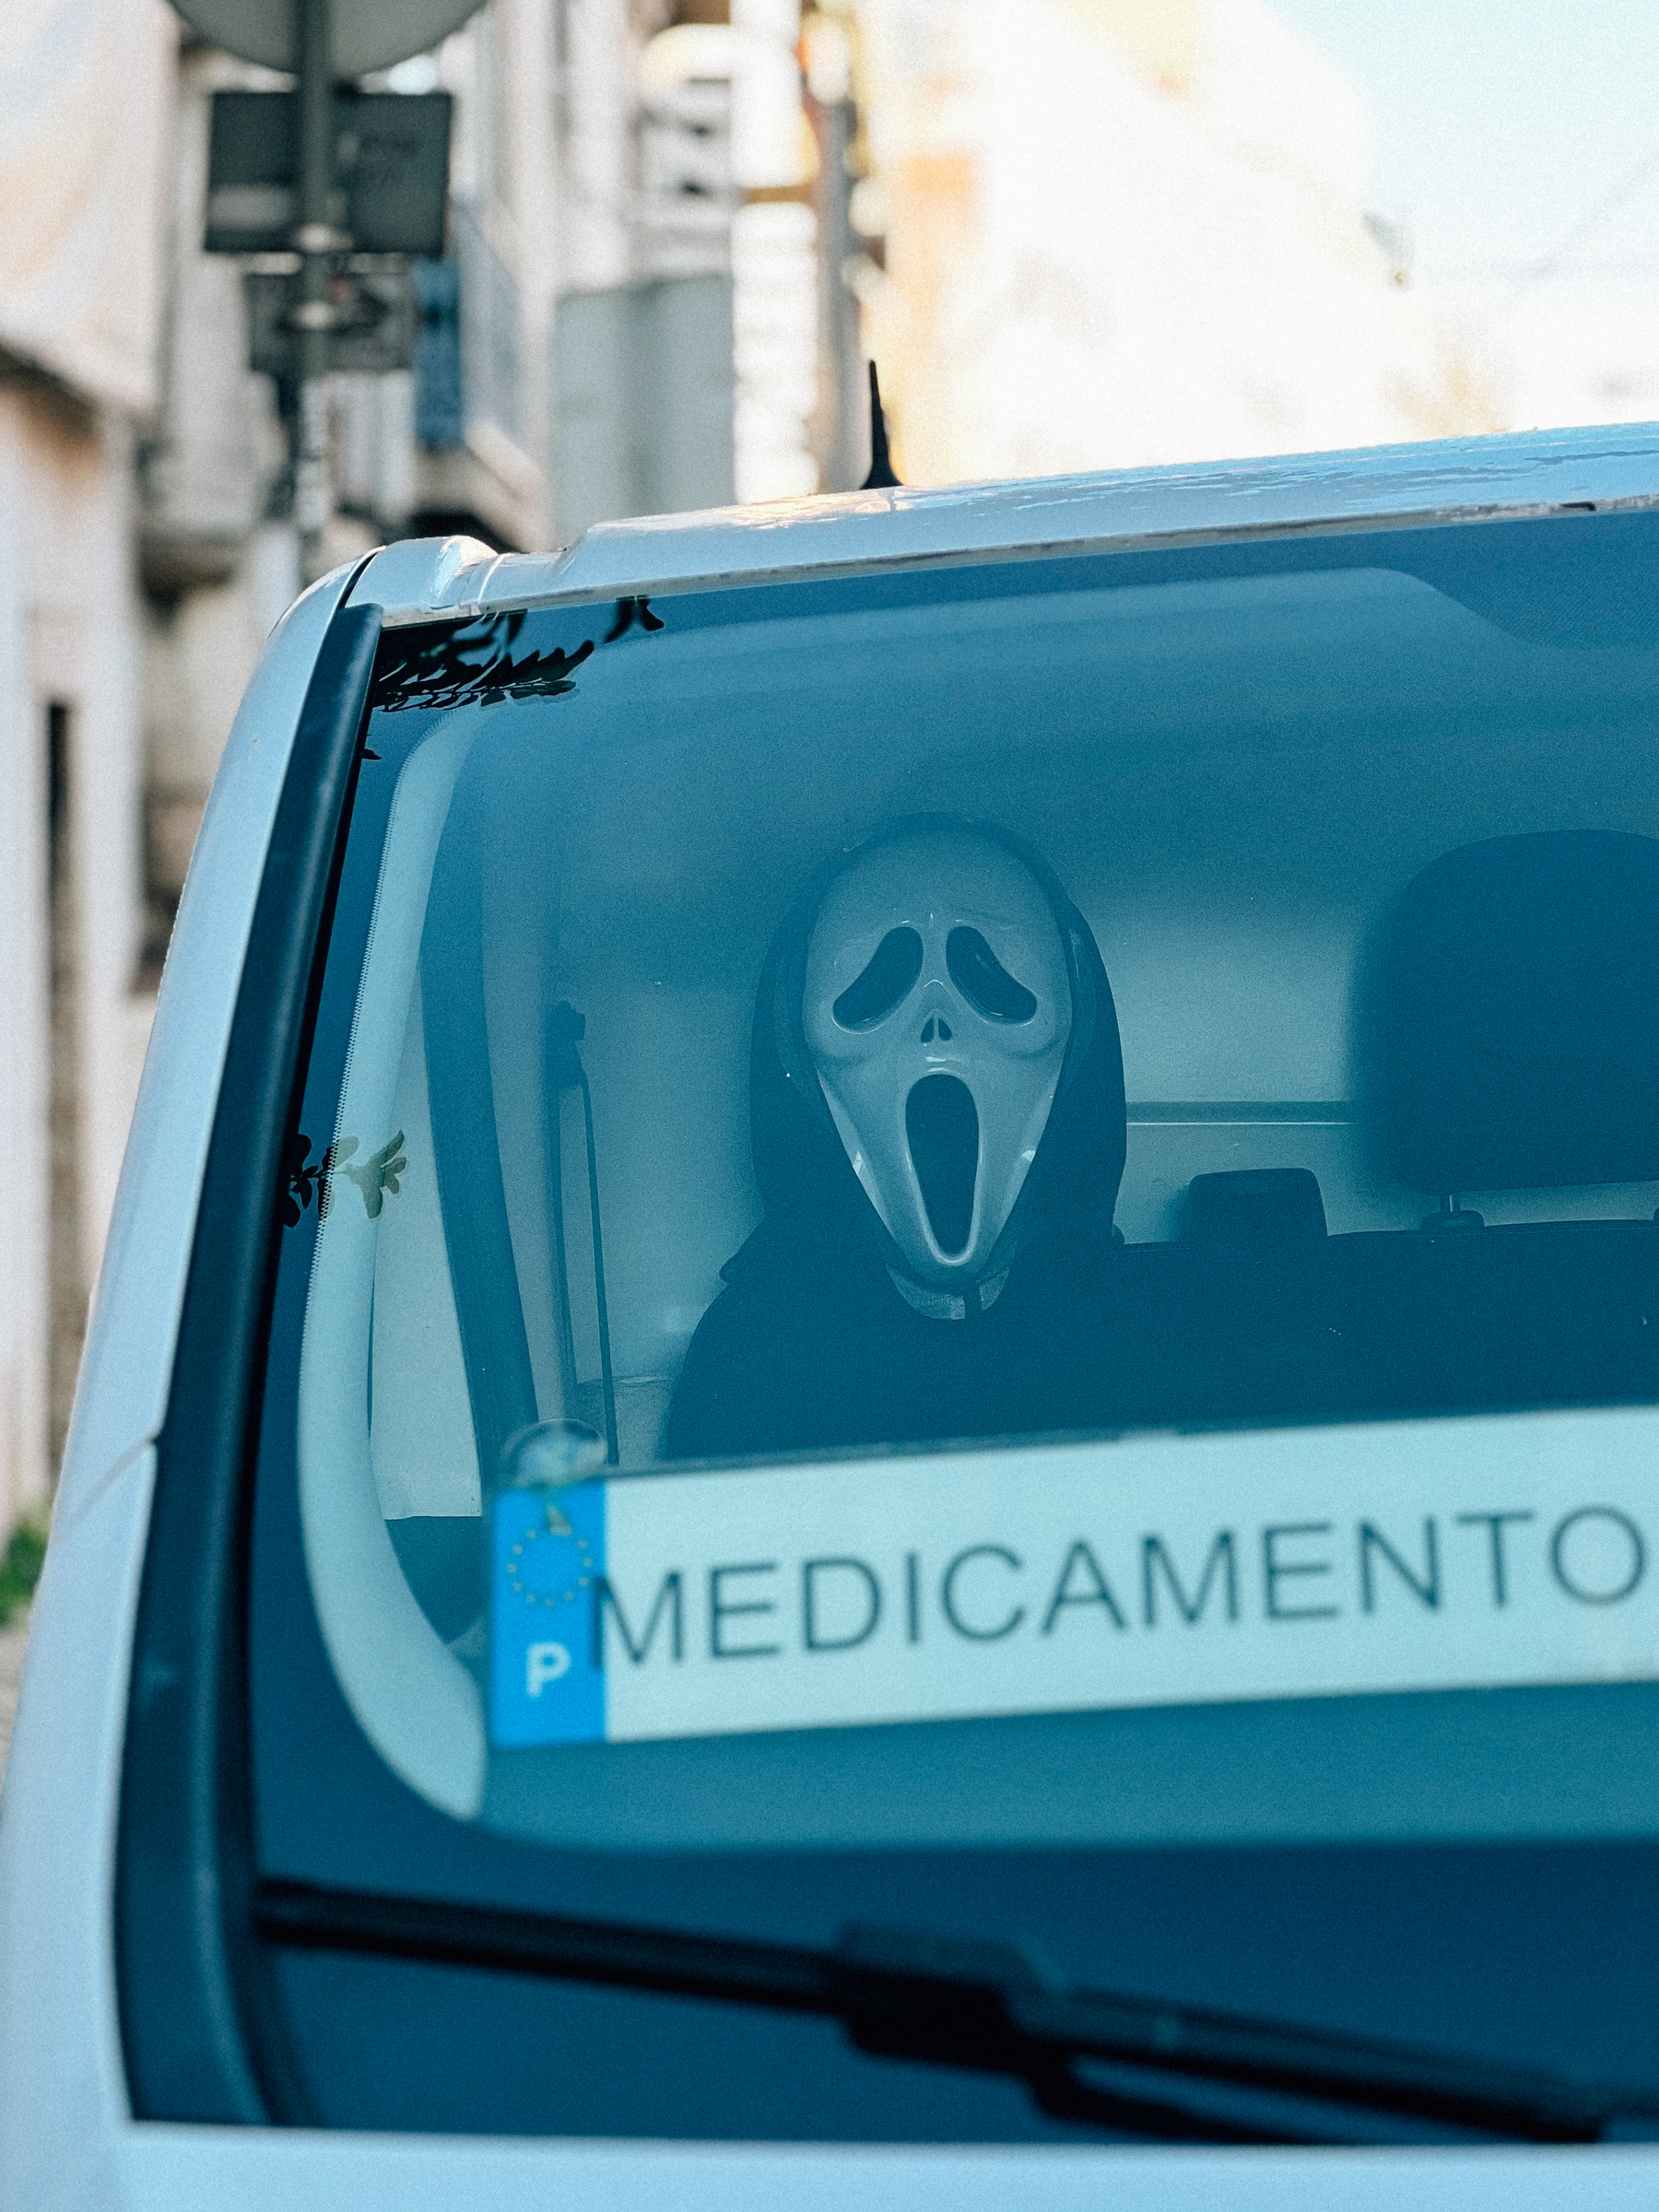 Mask similar to the &ldquo;Ghostface&rdquo; mask from the &ldquo;Scream&rdquo; movie series seen inside a vehicle with a sign that reads &ldquo;MEDICAMENTOS,&rdquo; suggesting it&rsquo;s a medical services or pharmacy delivery van.